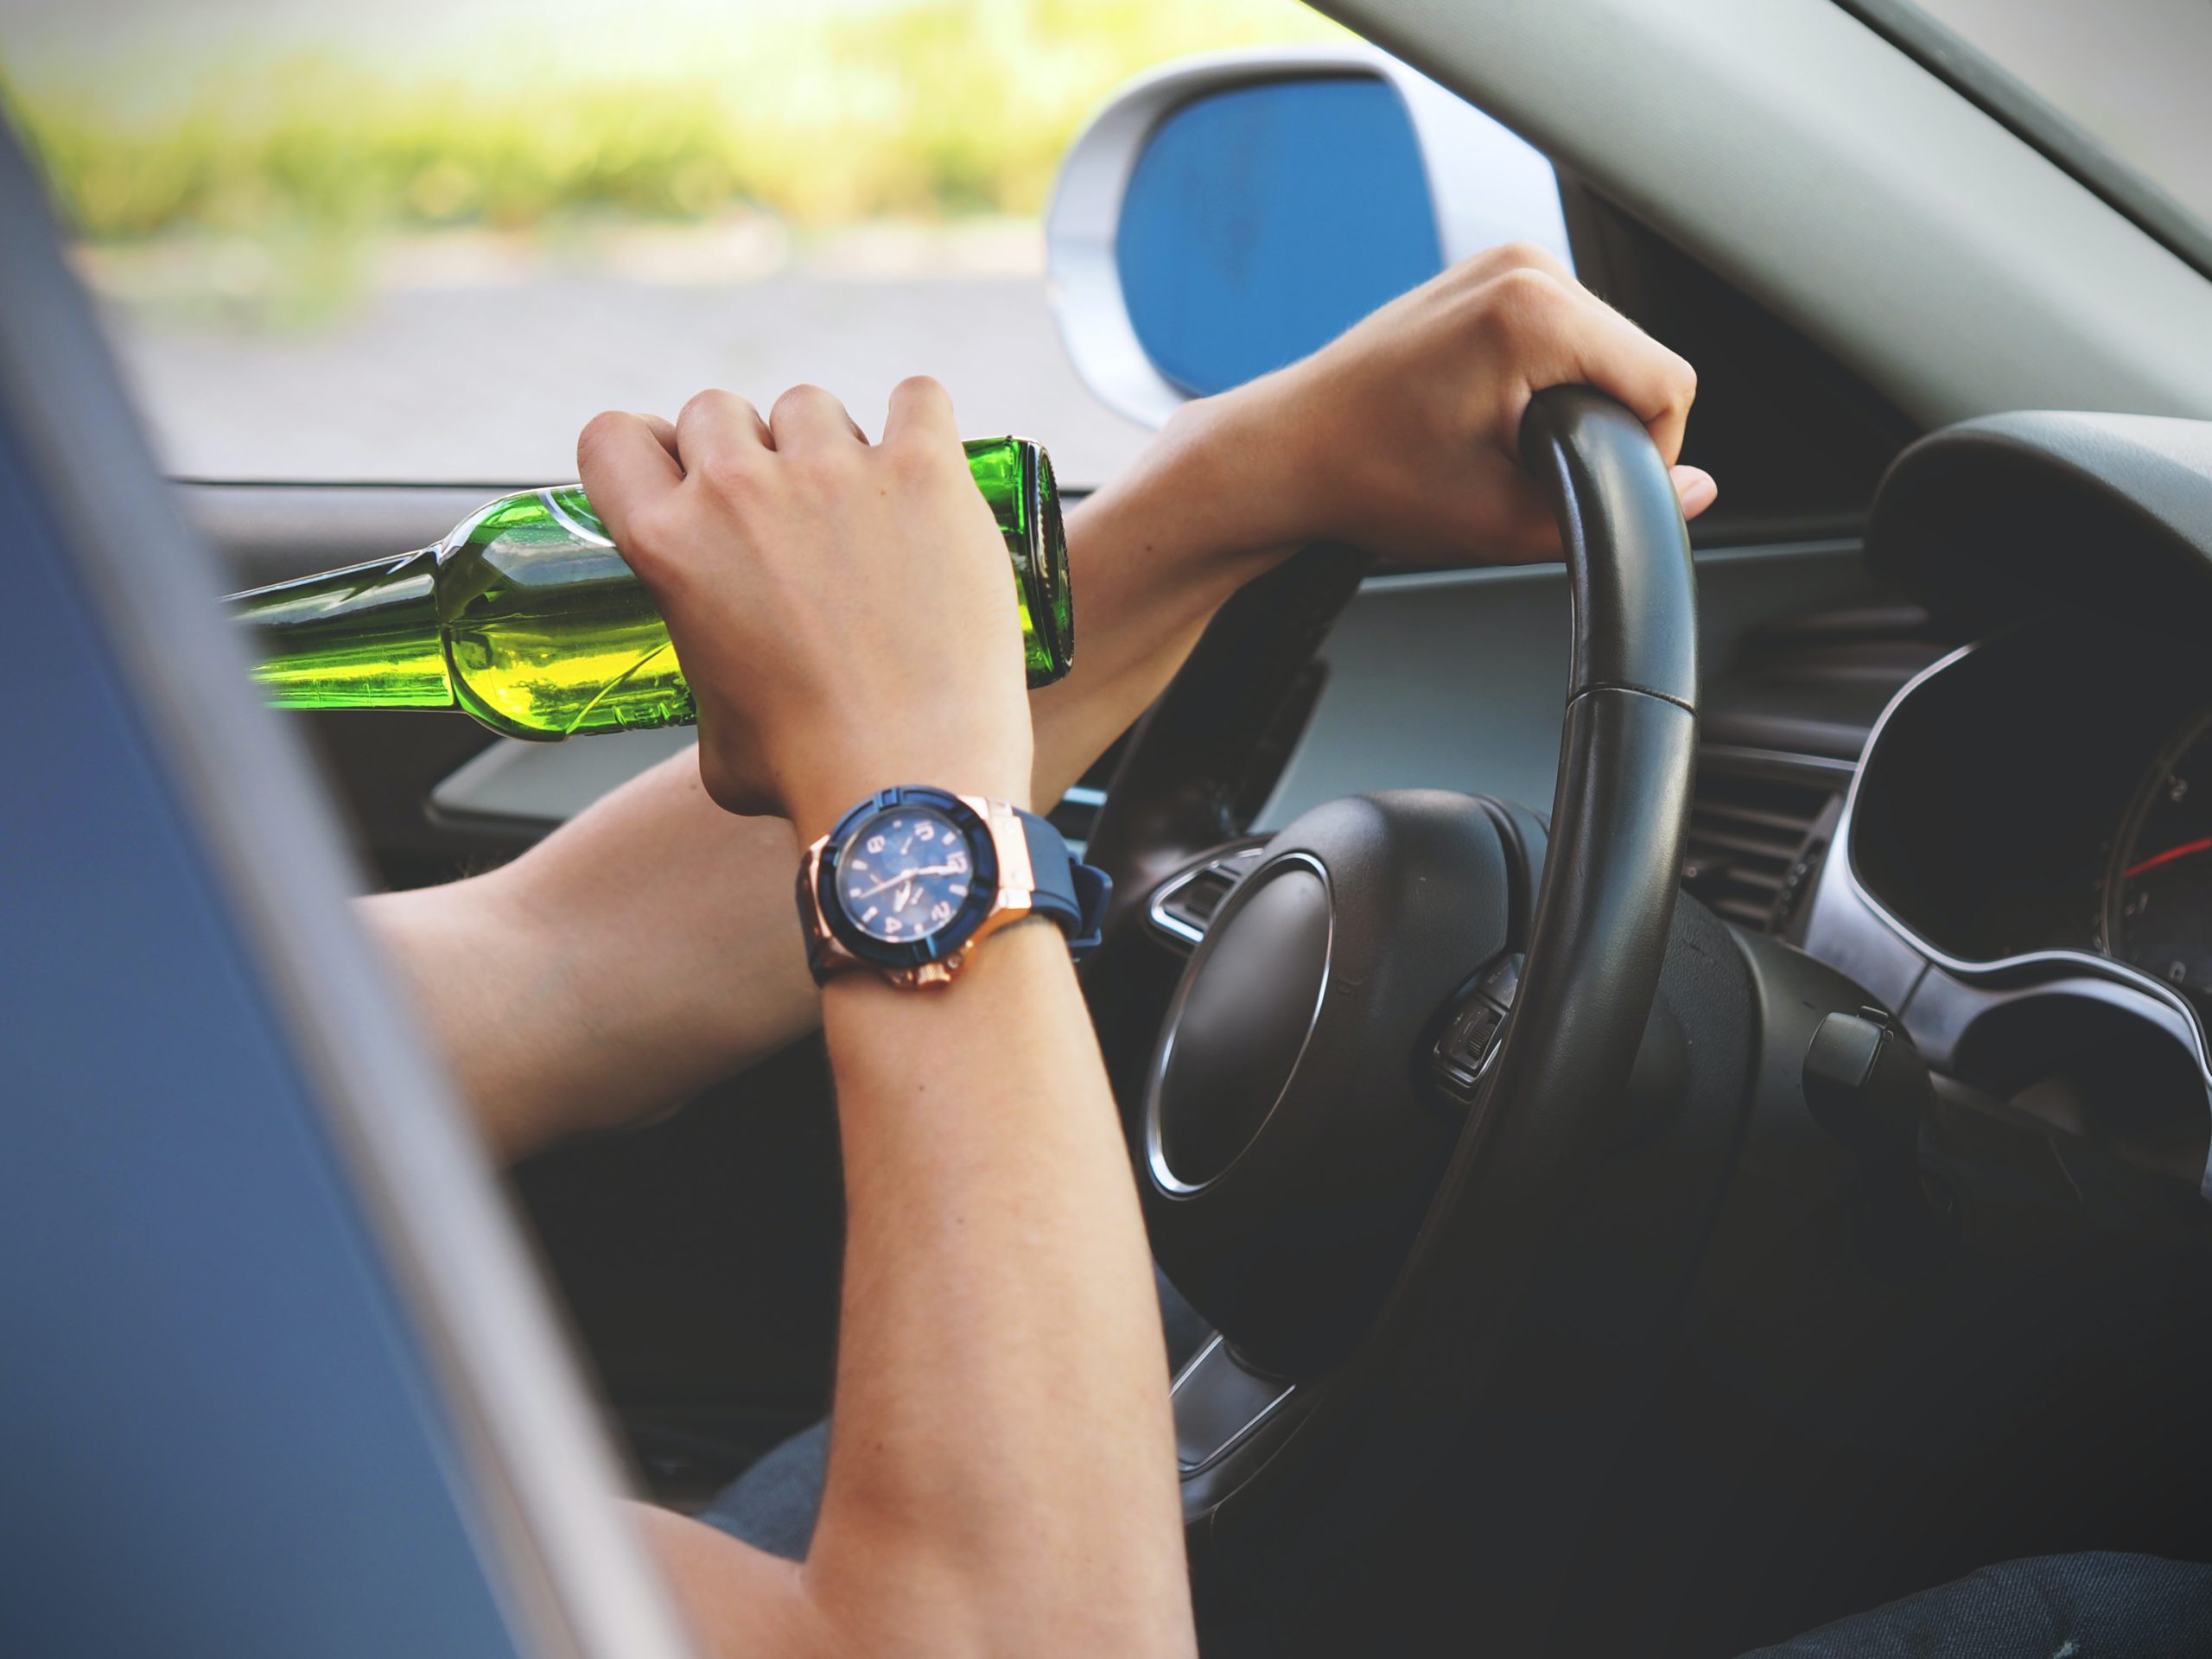 The consequences of drunken-driving convictions in Florida